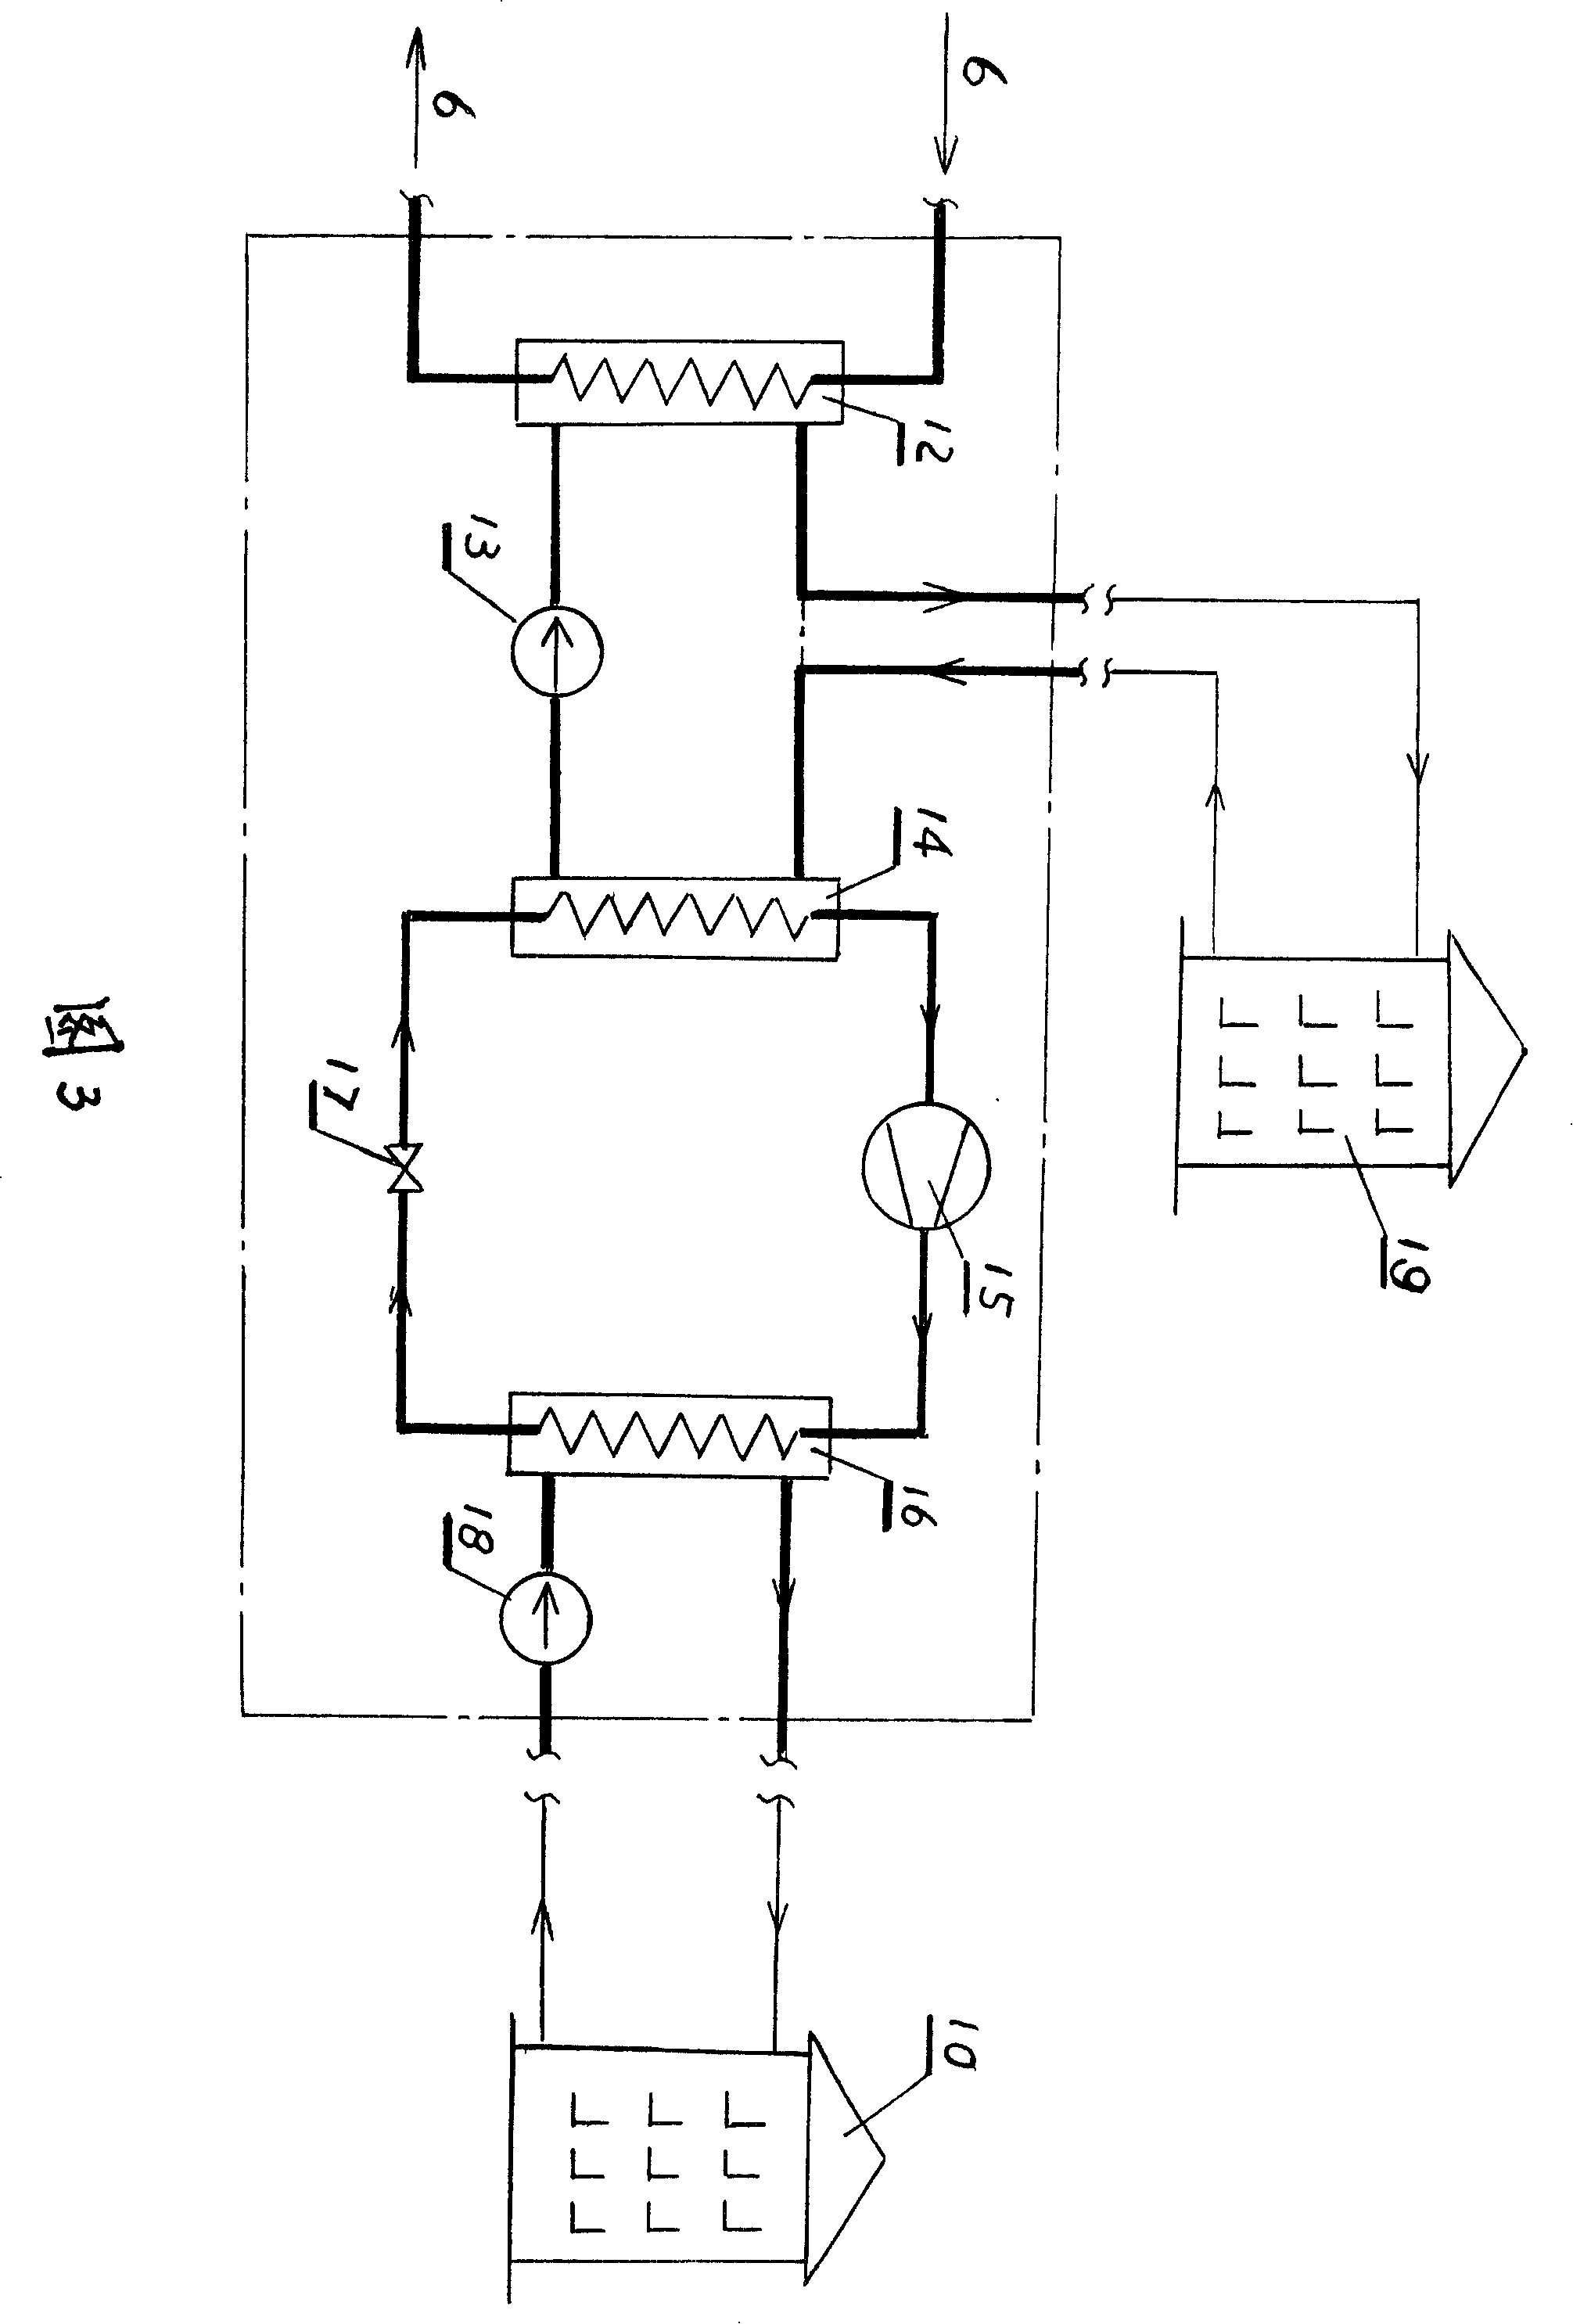 System and method for central heating using heat pump technical principle and its relative equipment